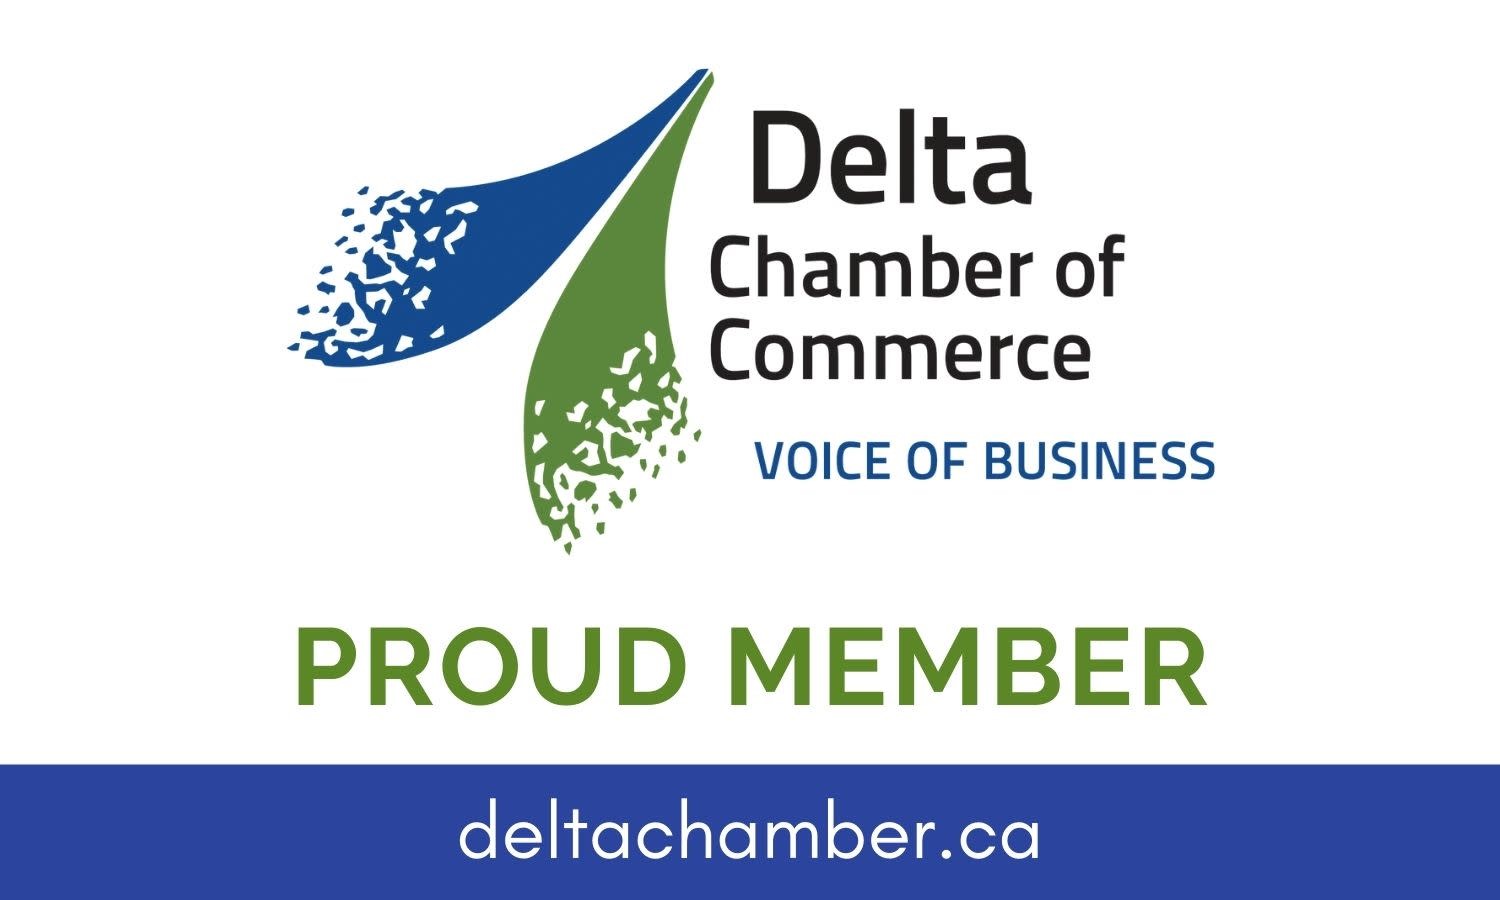 GPS is a Proud member of the Delta Chamber of Commerce